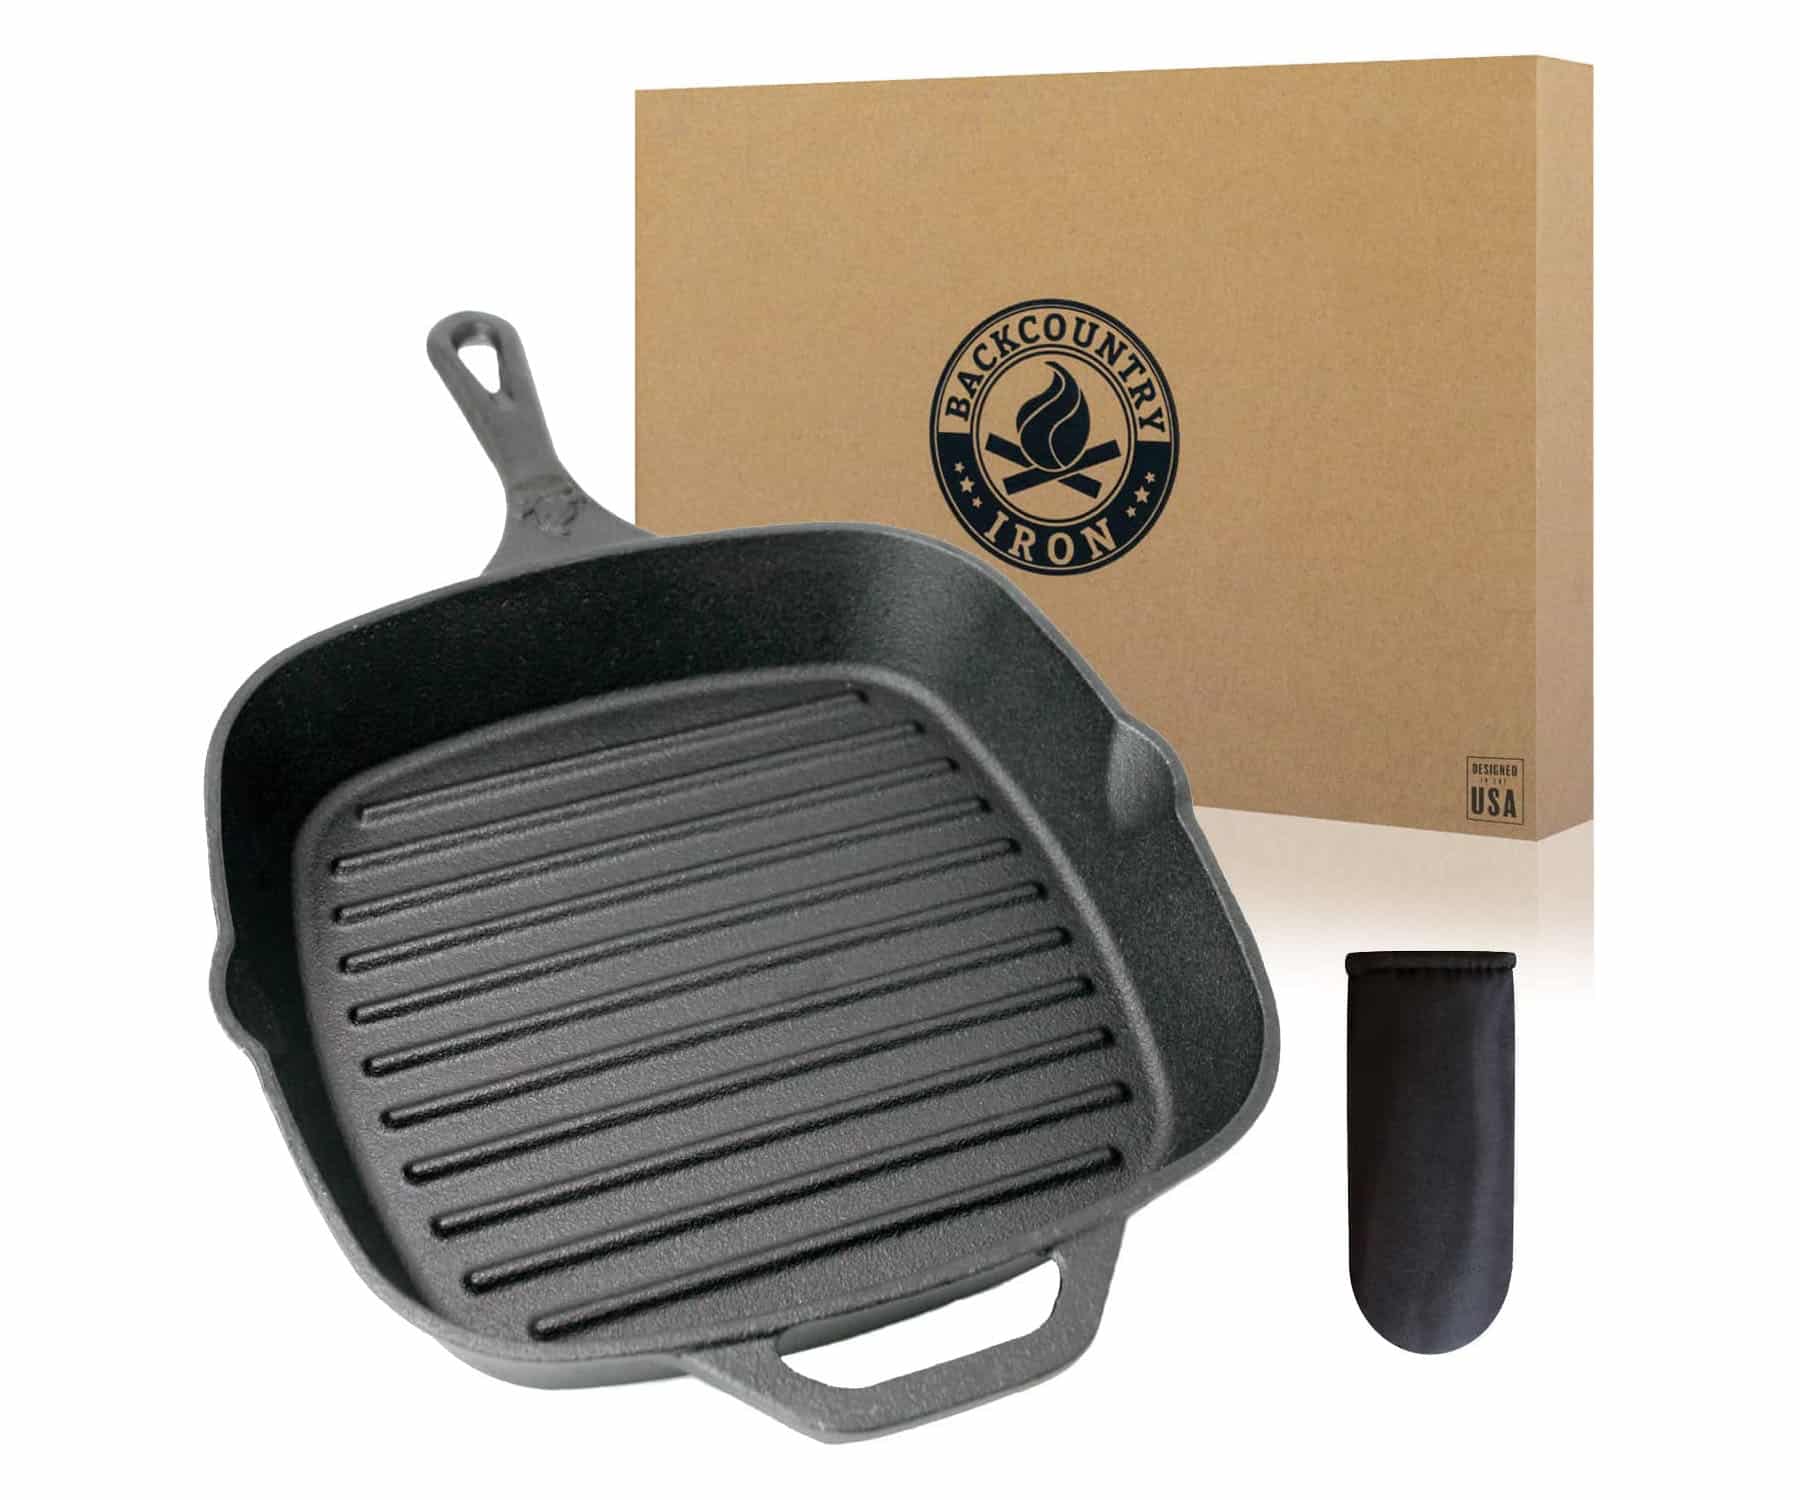 Backcountry Cast Iron 12 inch Large Square Grill Pan